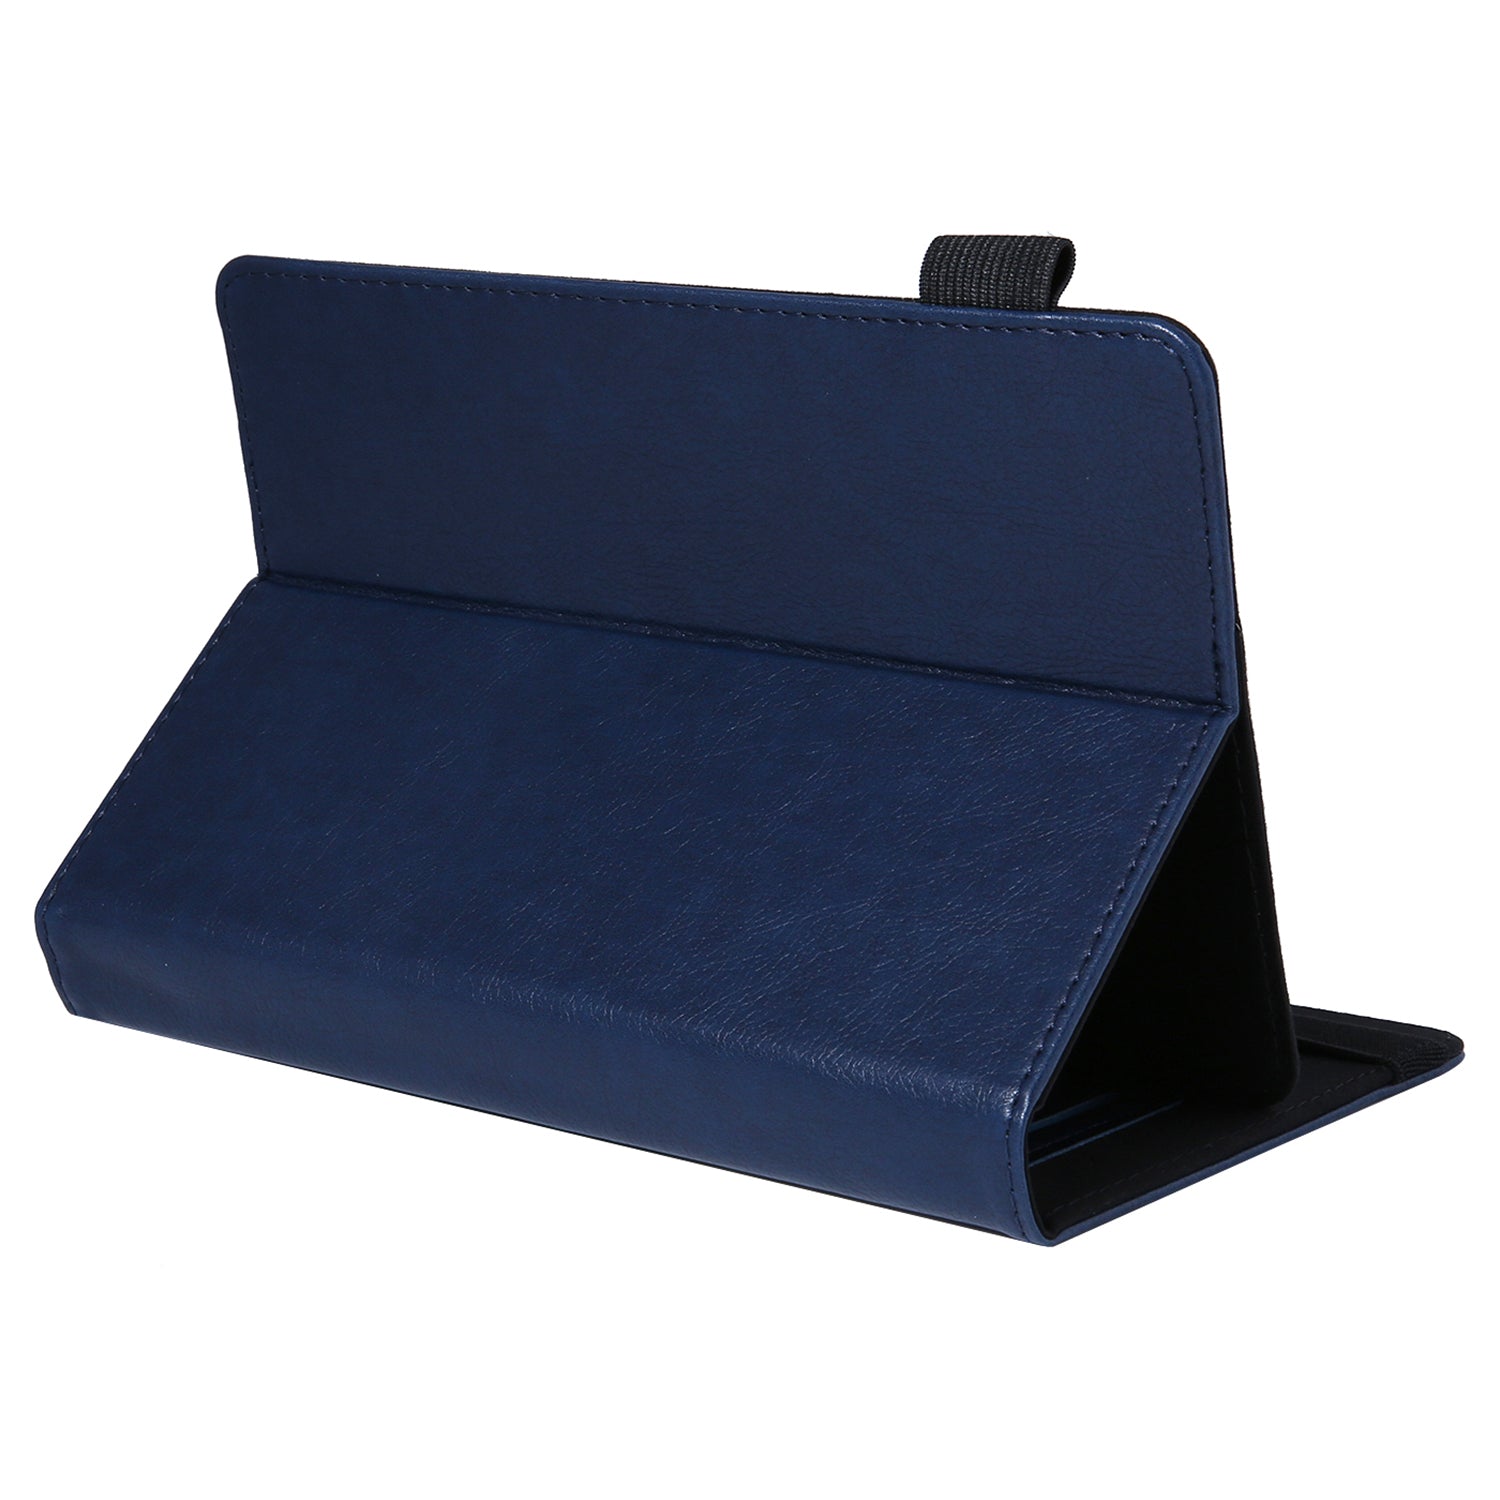 7-inch Tablet Leather Case Card Slots Stand Protective Cover - Sapphire